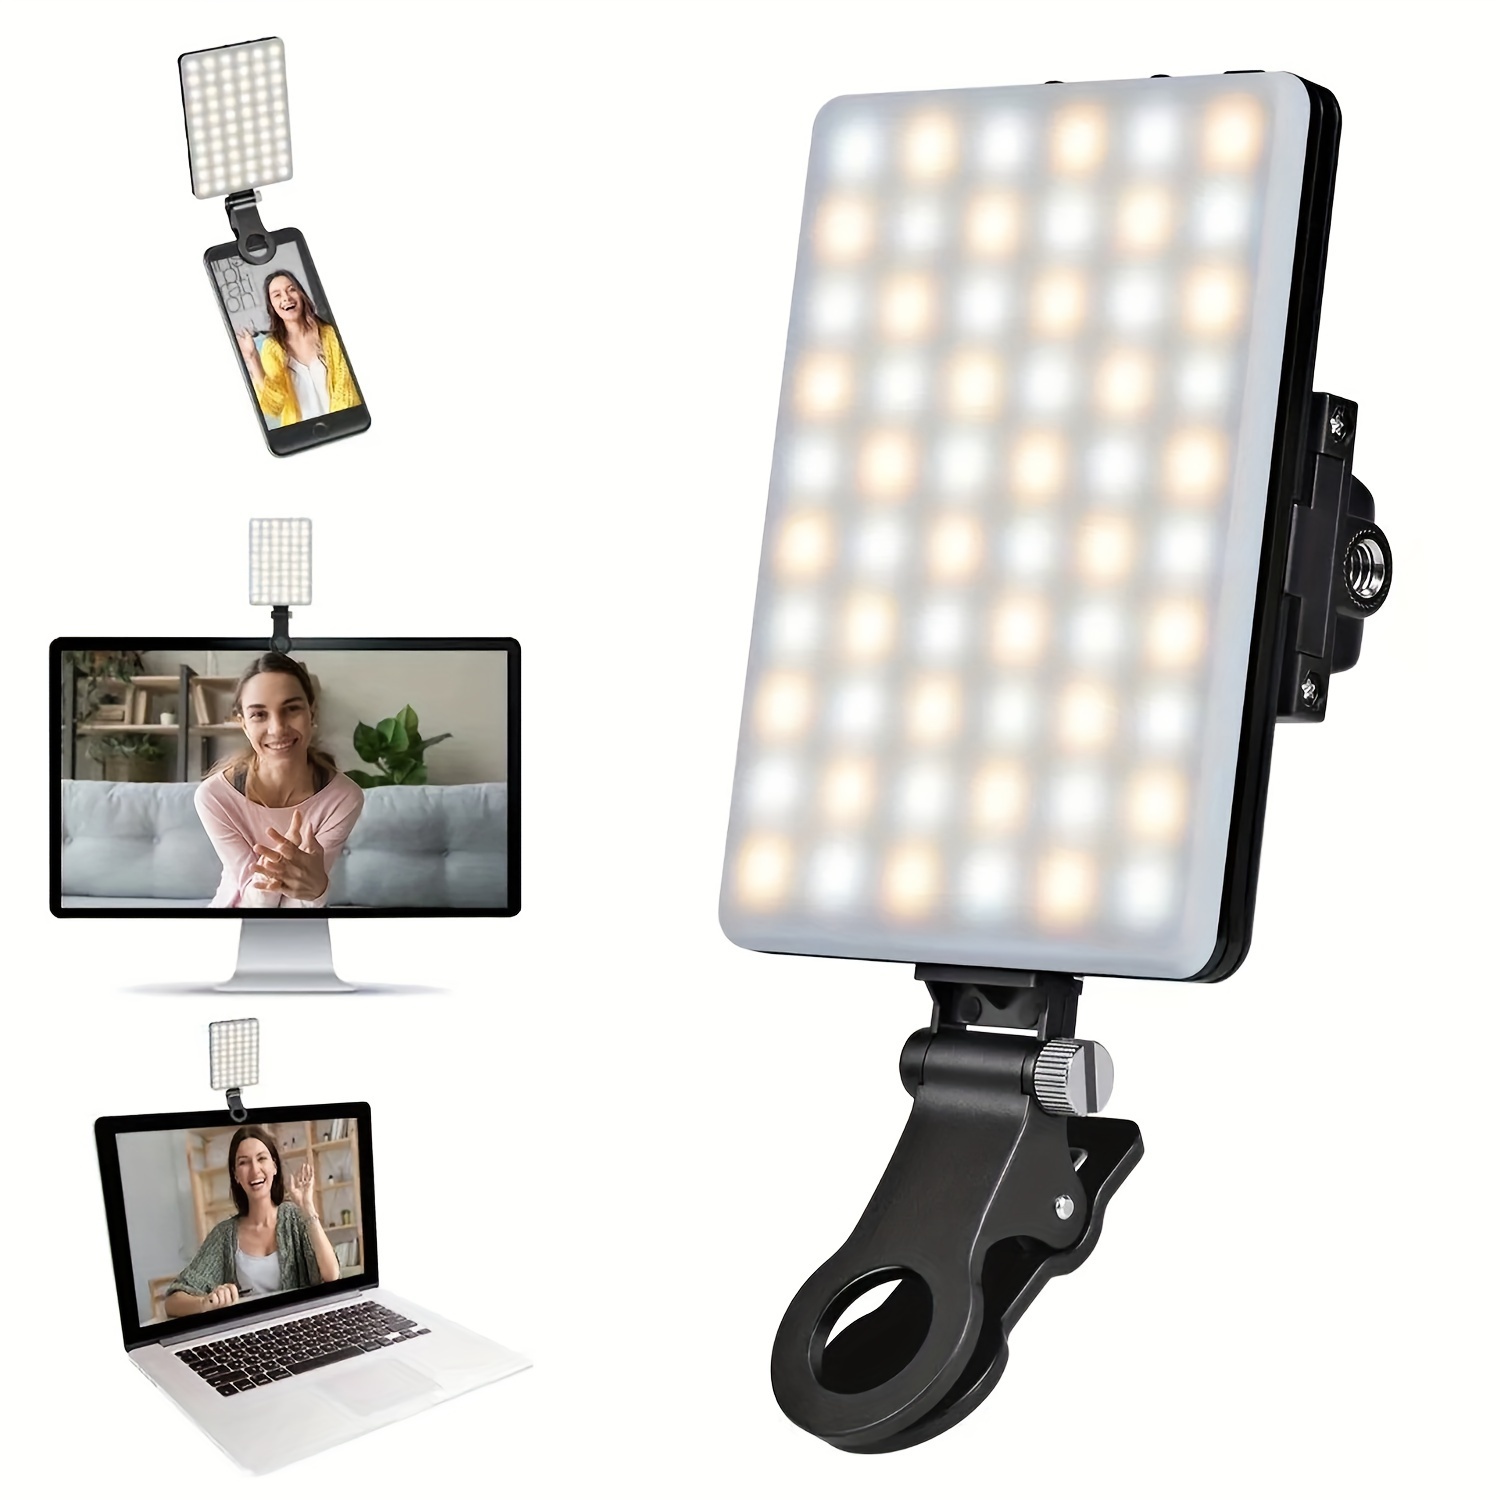 

Led Fill Light Pocket Selfie Lamp For Iphone Ipad Mobile Phone Laptop Fill Video Light With Front & Back Clip Adjusted 3 Light Modes 80 Led High Power Rechargeable Video Light